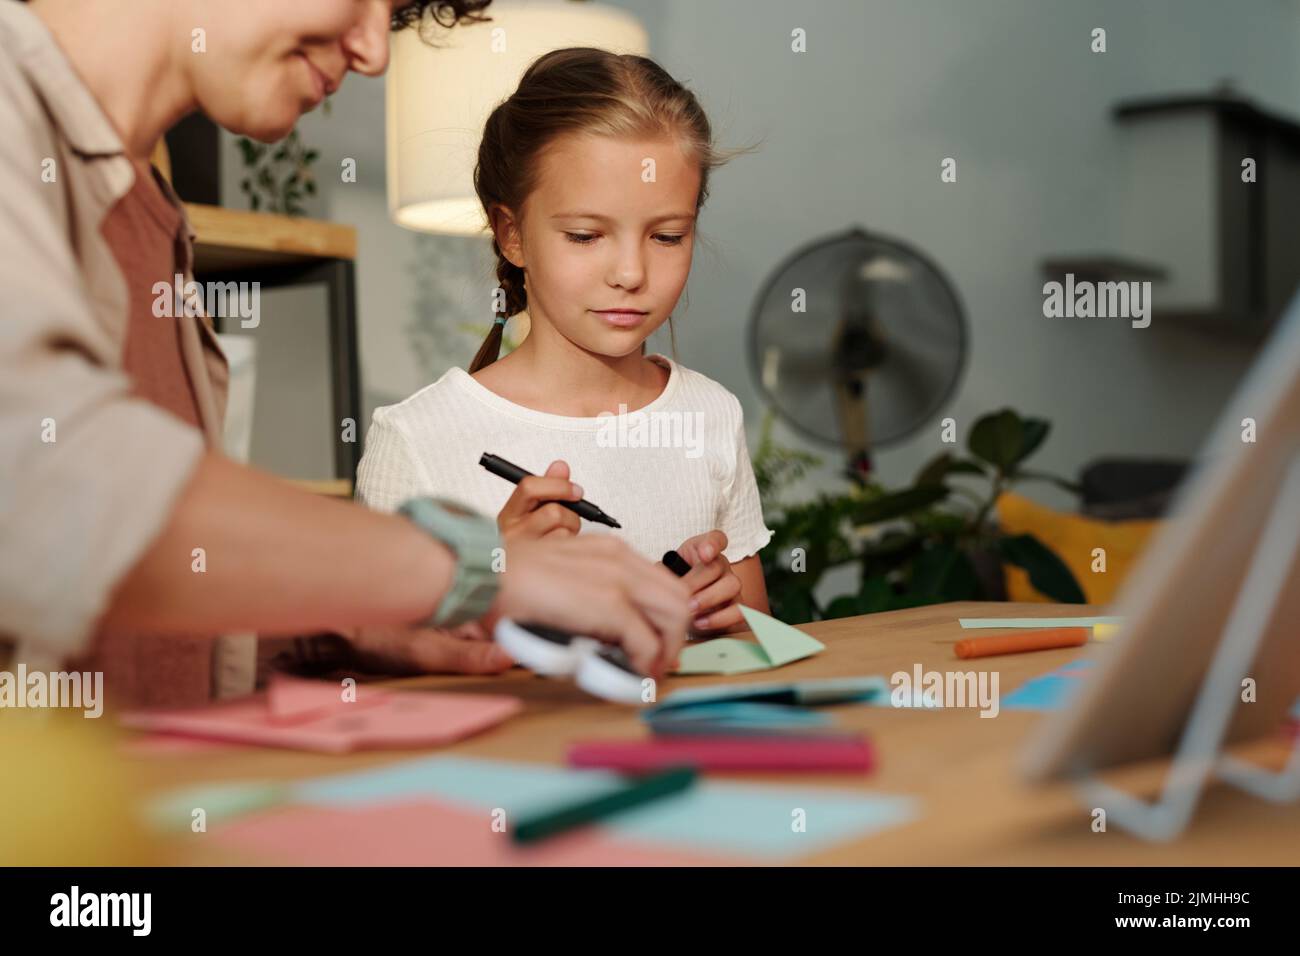 Cute girl looking at her mother folding paper while creating origami at leisure after watching online course or masterclass Stock Photo